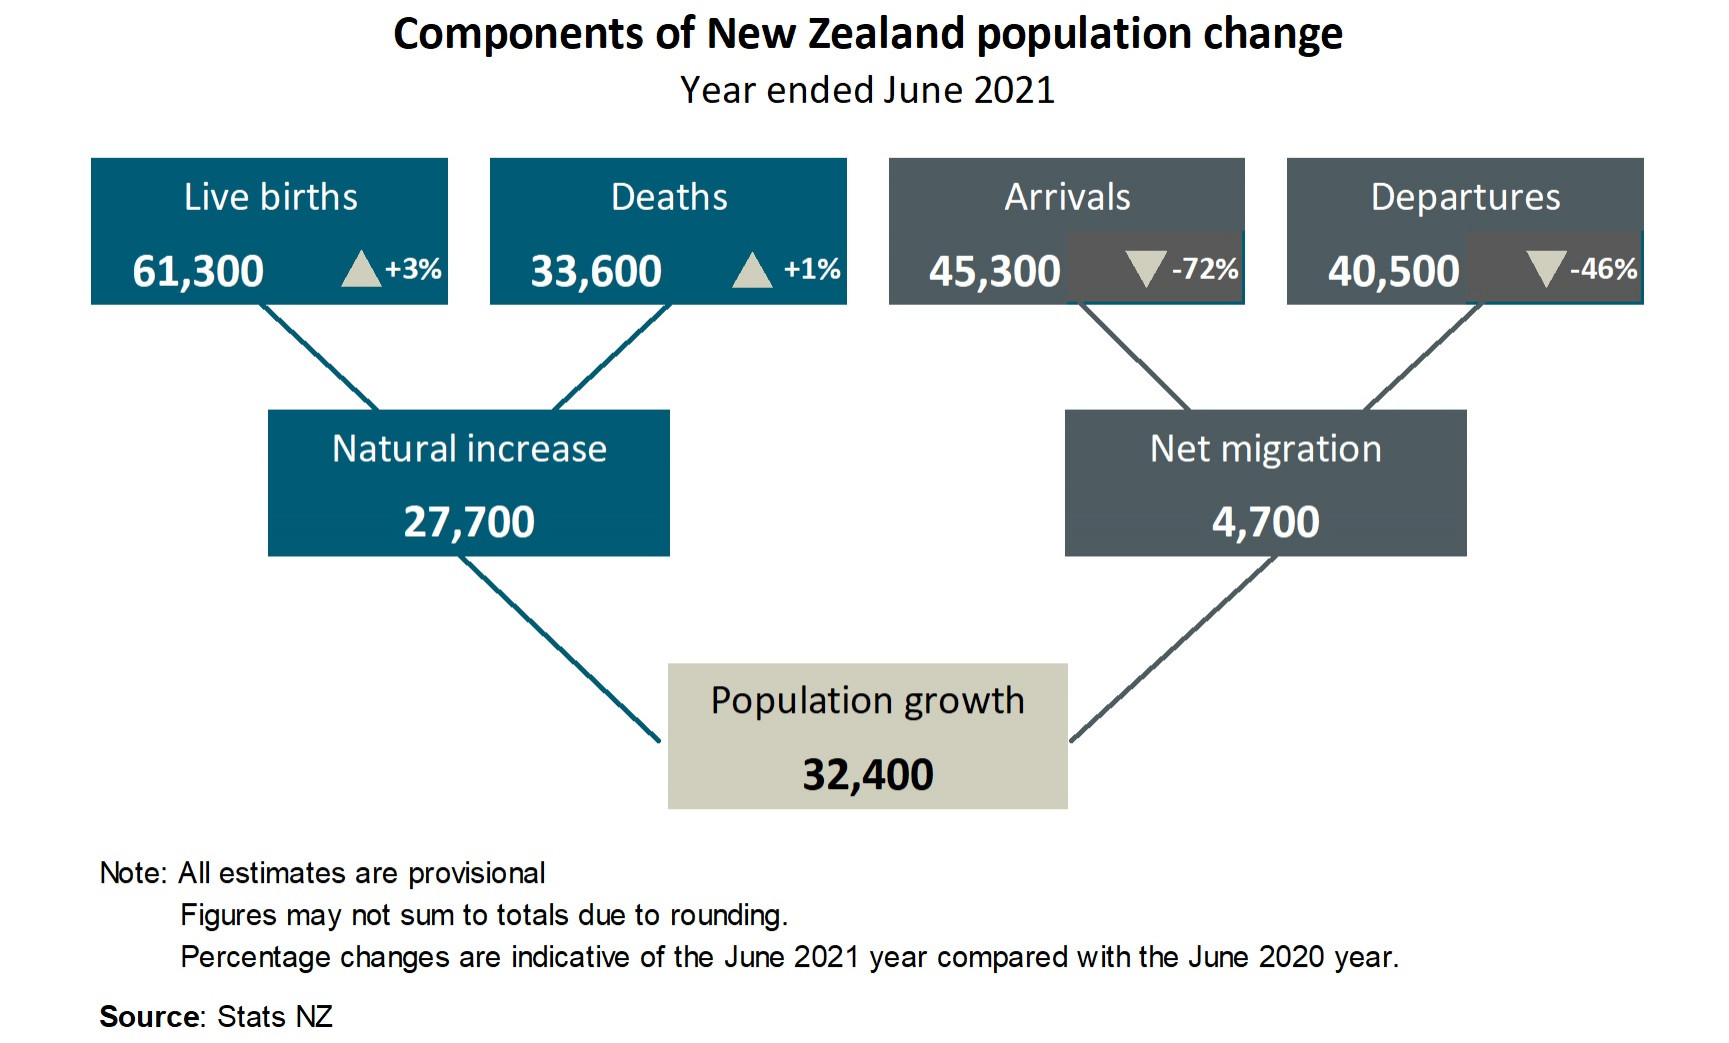 Diagram showing components of New Zealand population change, year ended June 2021. Text alternative available below diagram.